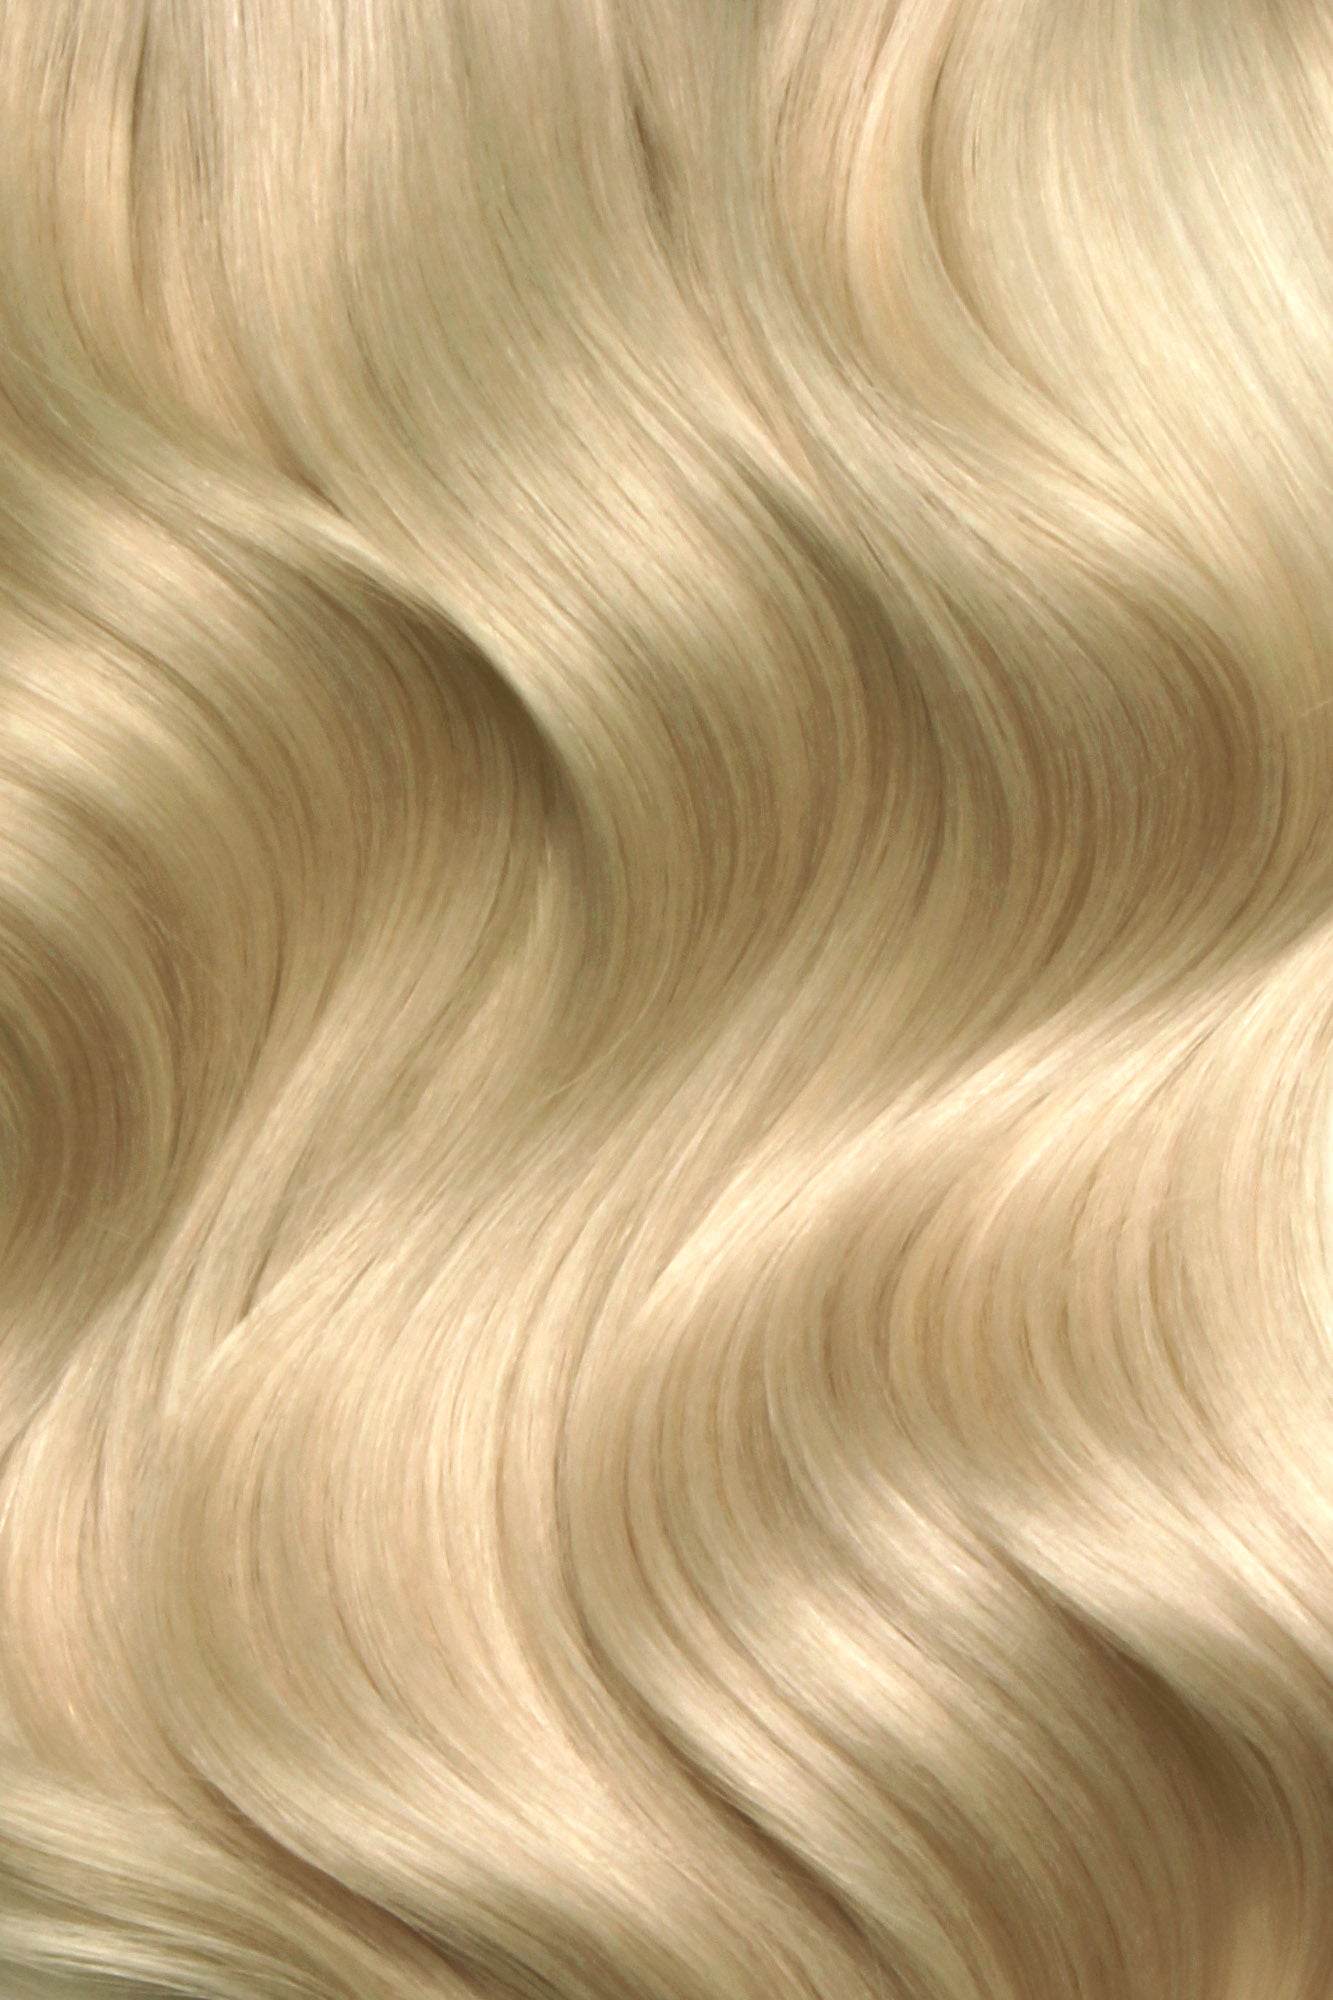 SEAMLESS® Flat Weft 18 Inches - SWAY Hair Extensions LA-Blonde-613-24 Natural SEAMLESS® Flat Weft 18 Inches extensions. Thin, flexible, and discreet. 100% Double Drawn Remy Human Hair. Versatile and reusable